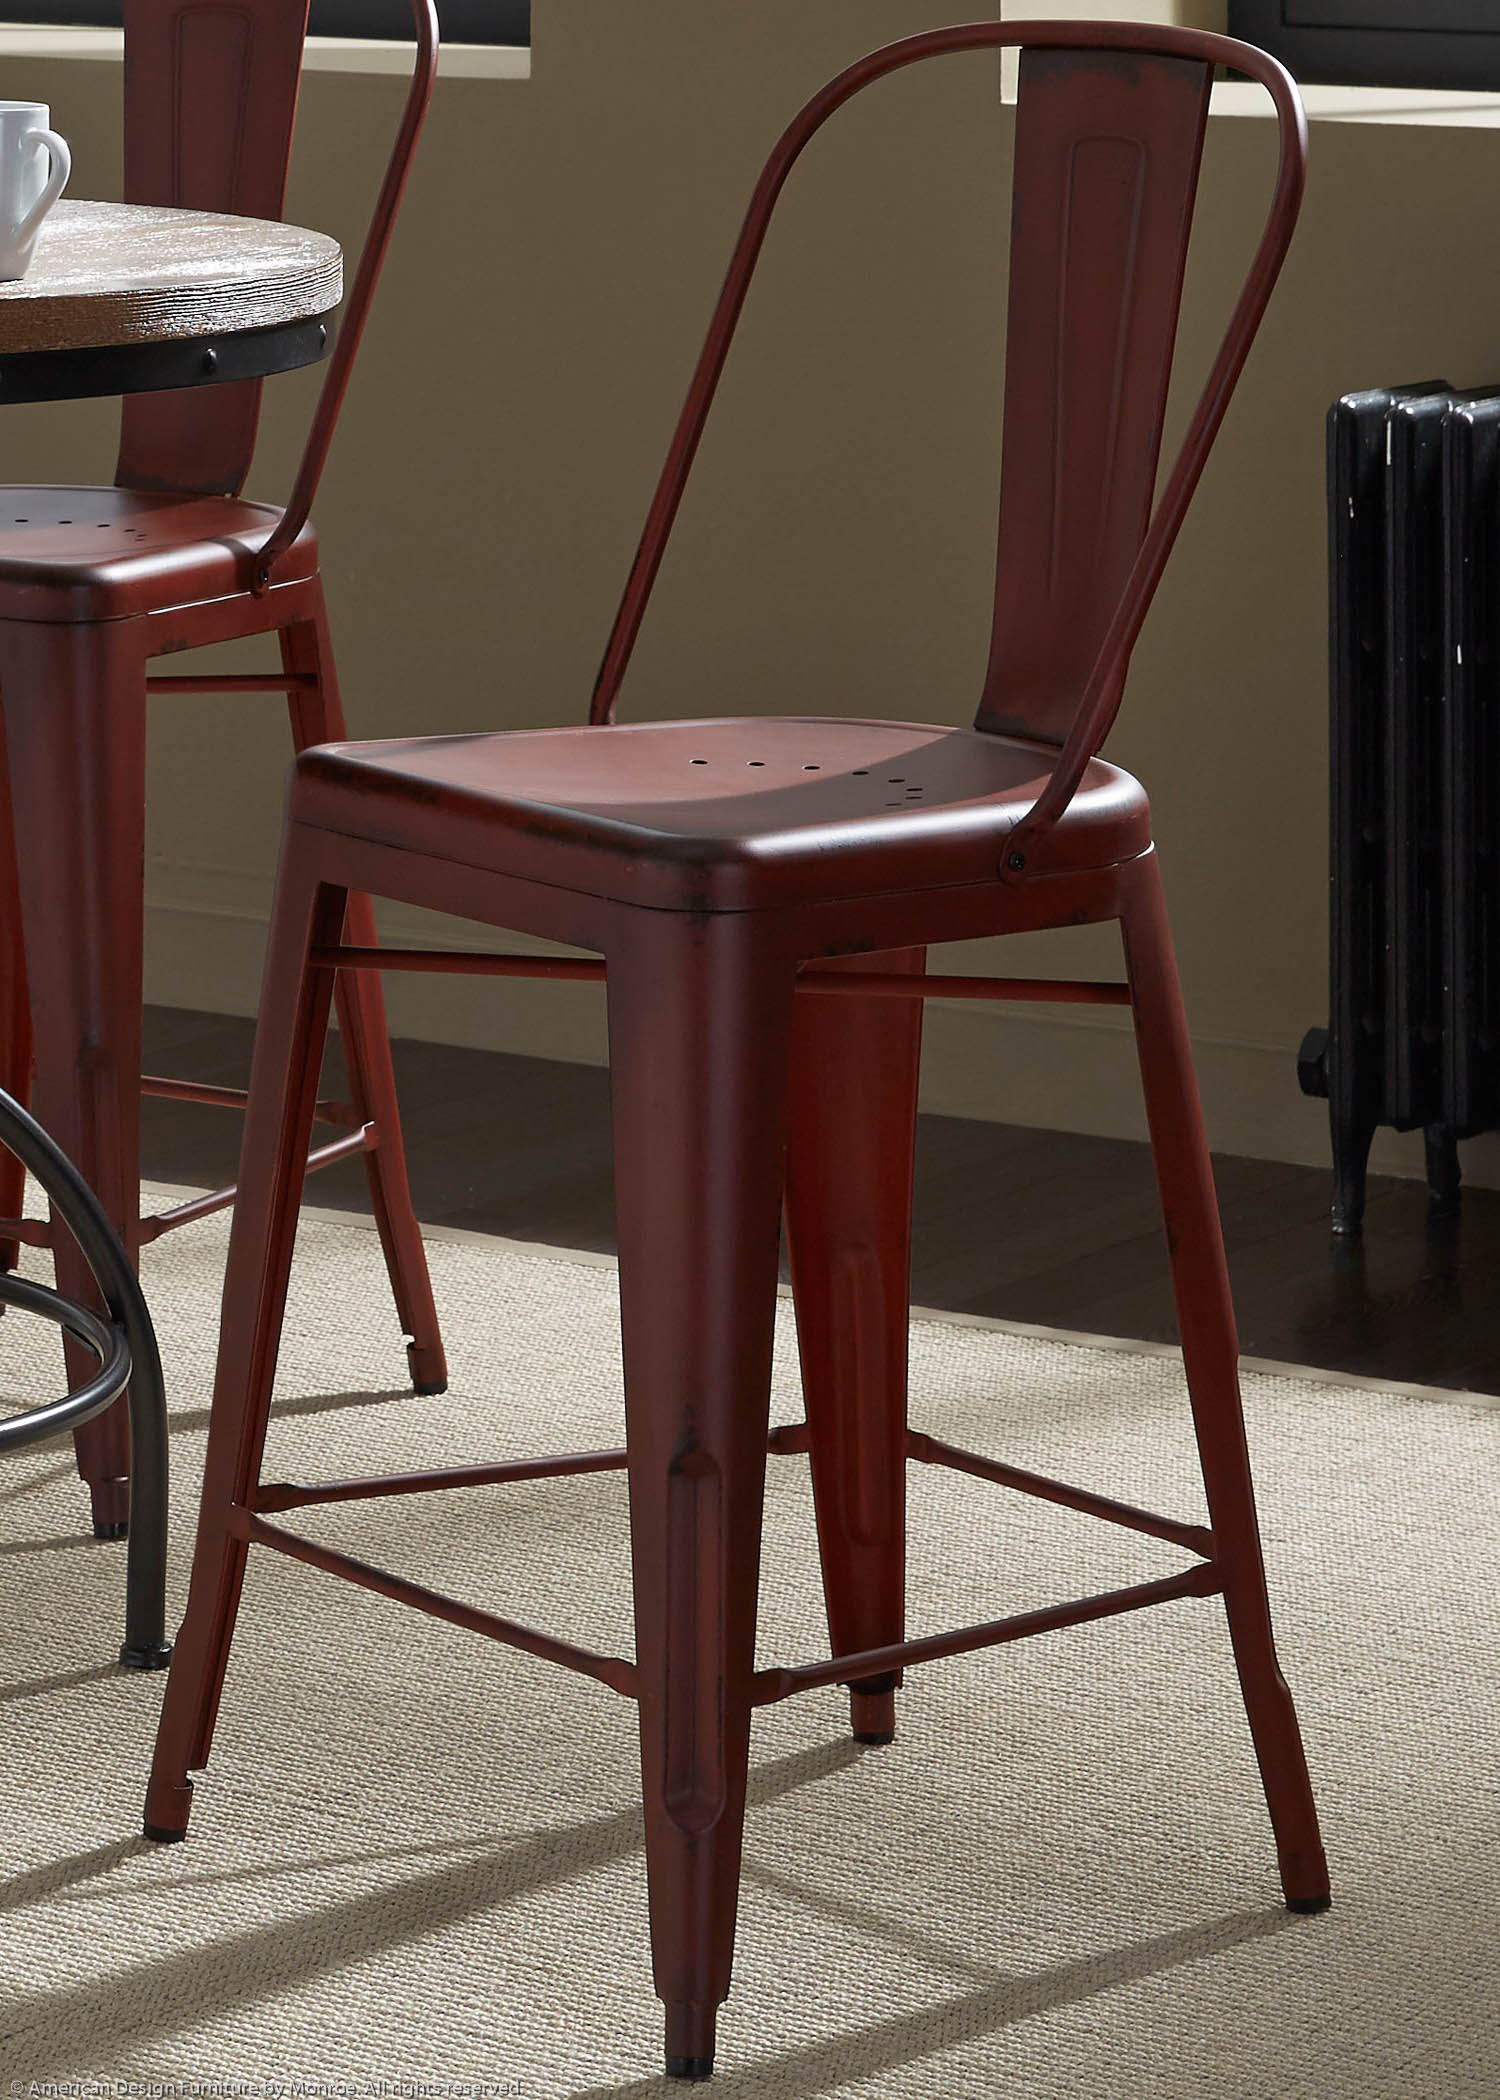 Reading Casual Bow Back Counter Chair Pic 09 (Heading Bow Back Counter Chair 2 (Red)